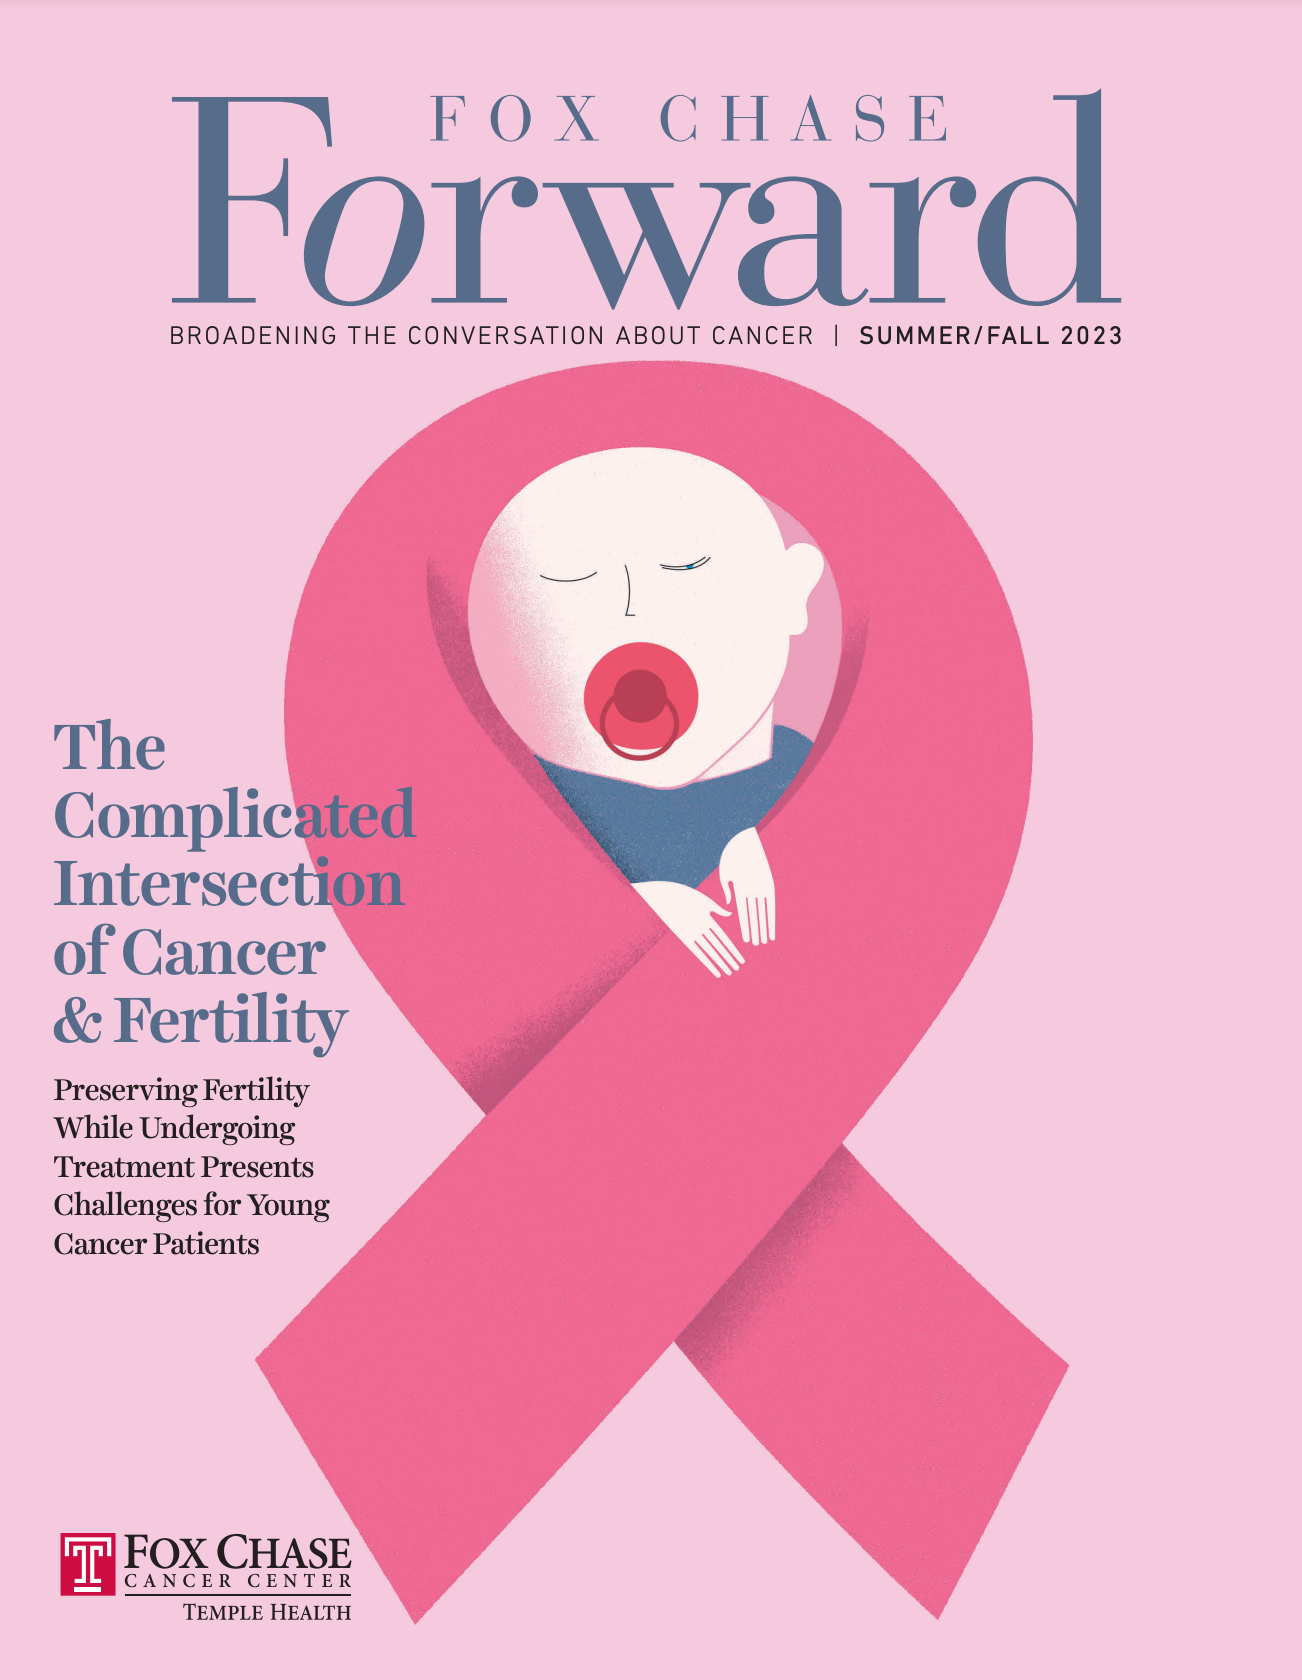 Fox Chase Forward: Broadening the conversation about cancer, Summer/Fall 2023 The Complicated Intersection of Cancer & Fertility Preserving Fertility While Undergoing Treatment Presents Challenges for Young Cancer Patients, Fox Chase Cancer Center, Temple Health, Image: a baby inside a pink ribbon